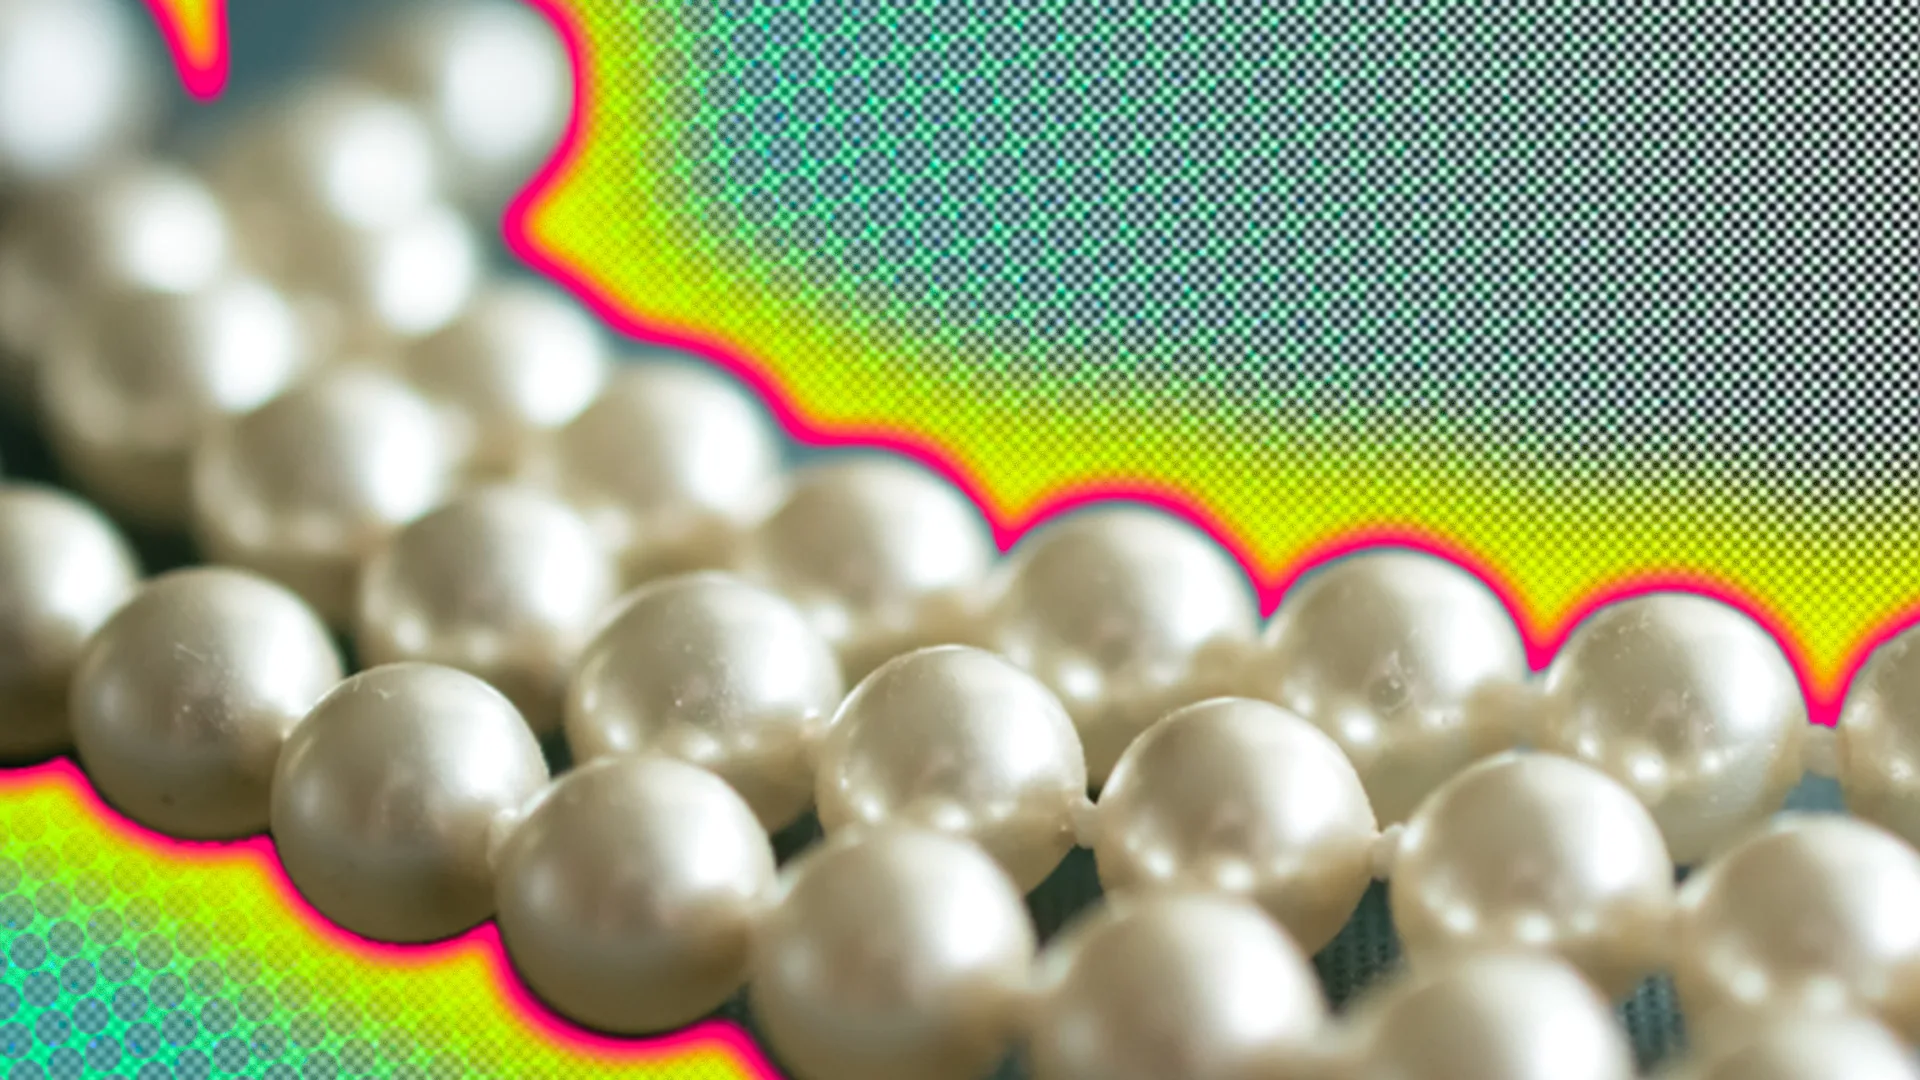 A close up of a pearl necklace with a polkadot background and a glow around the image